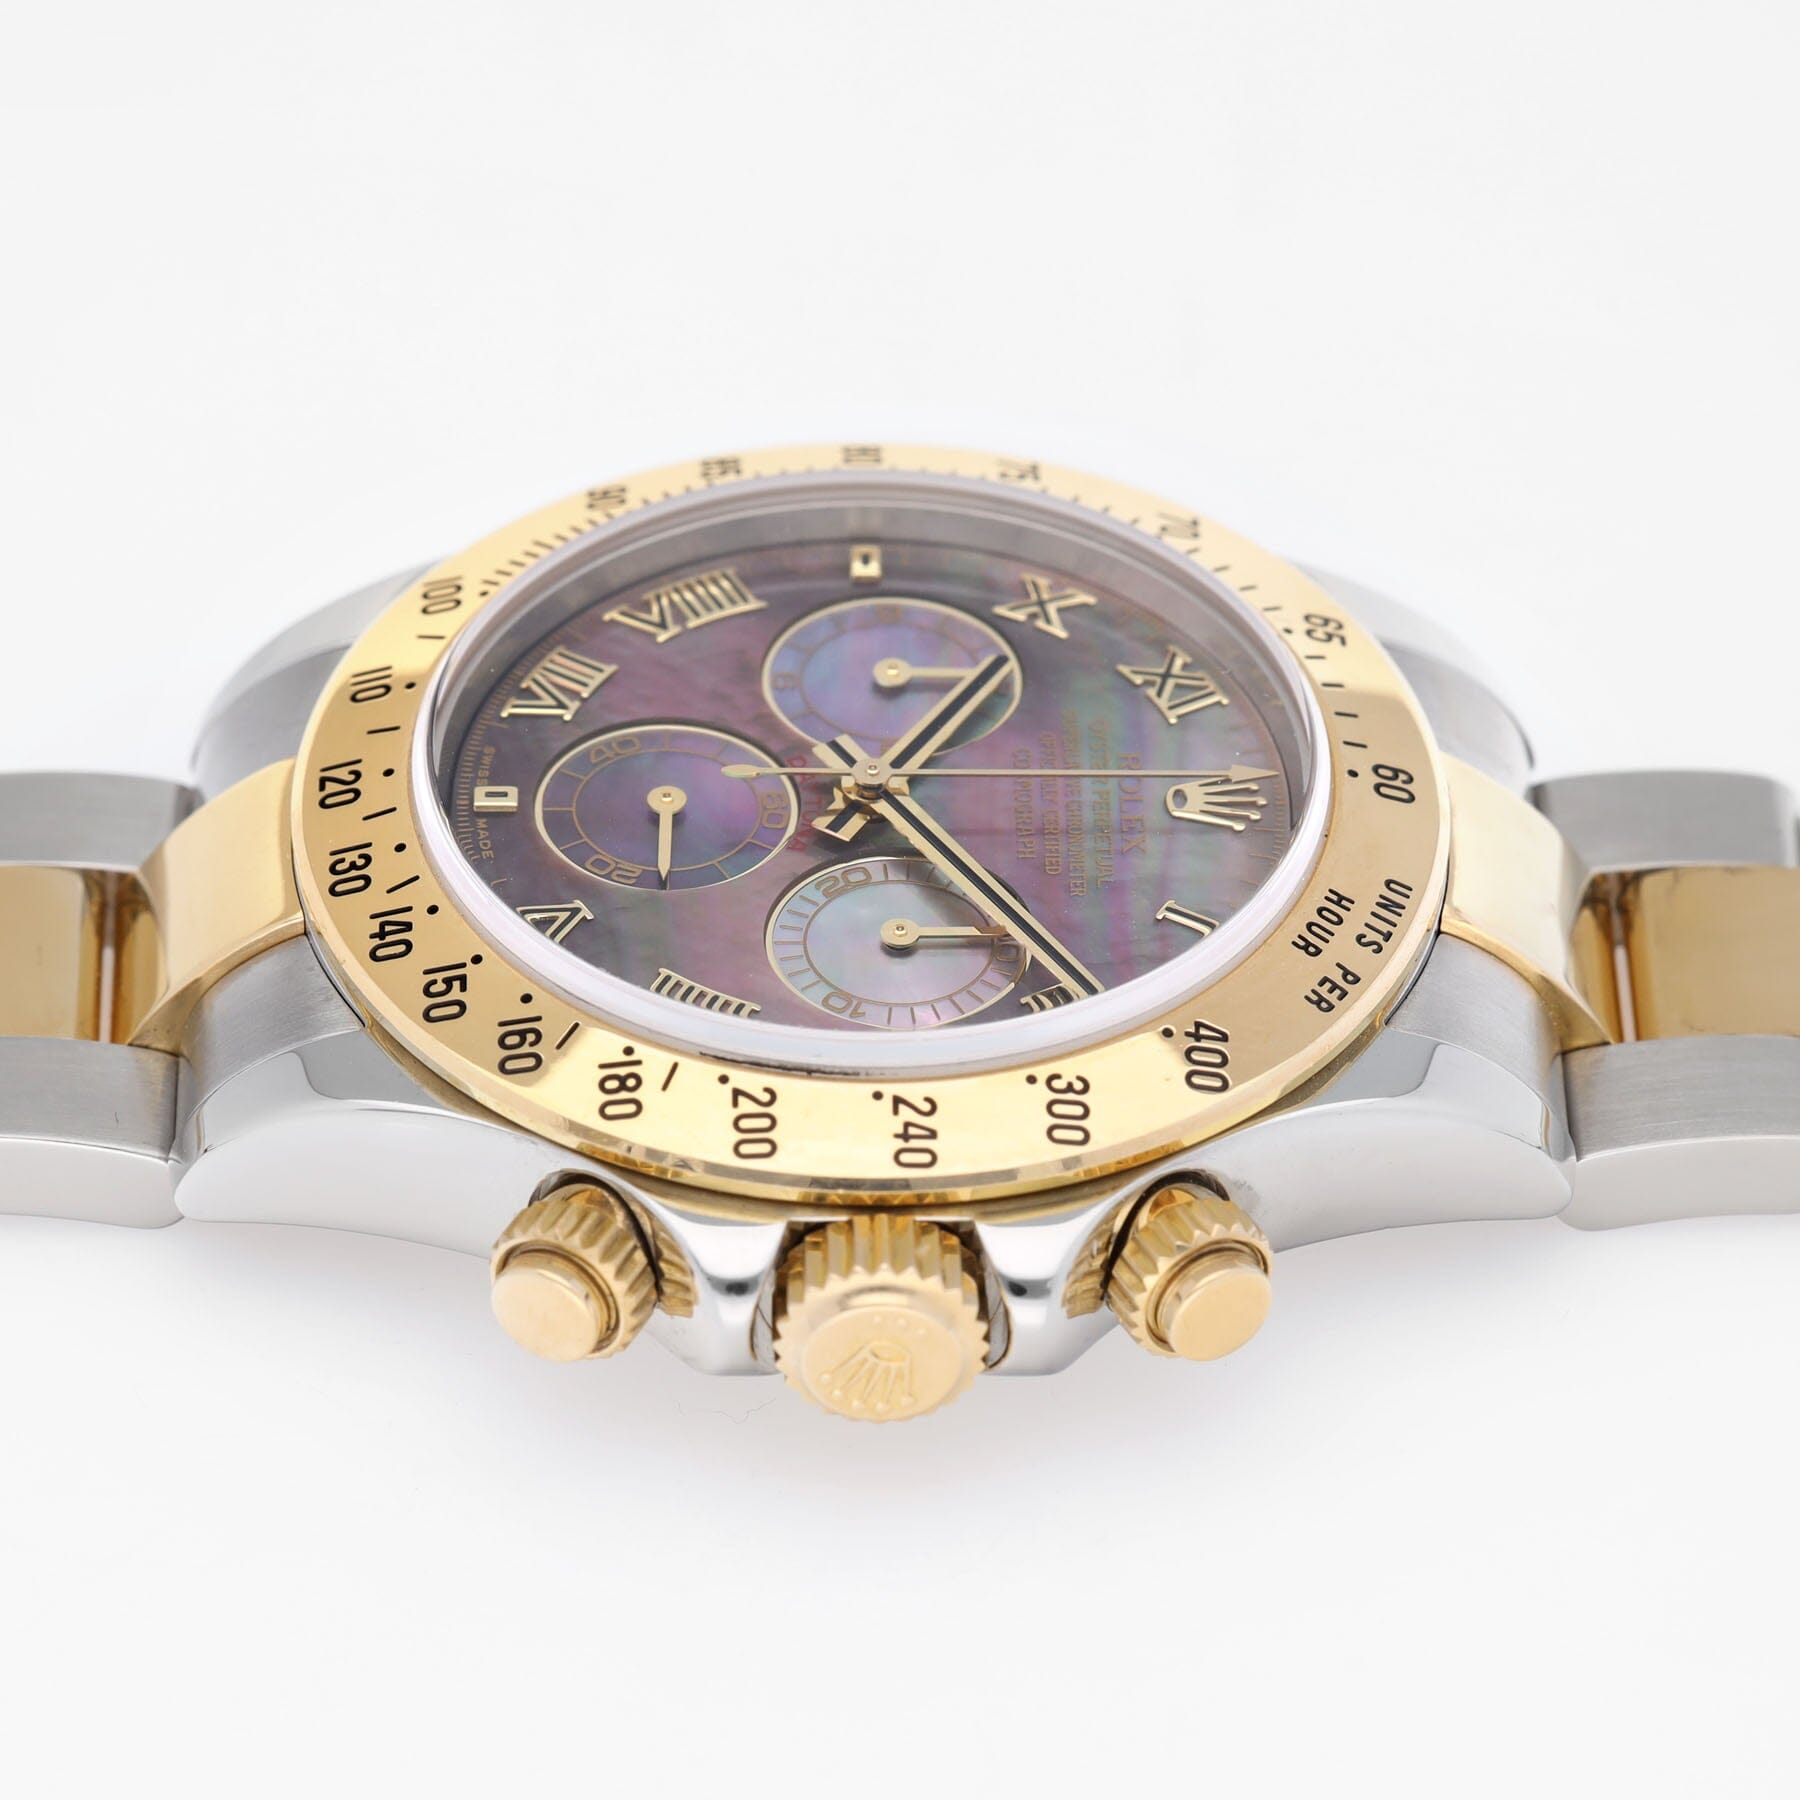 Rolex Daytona Mother of Pearl Dial Ref 116523